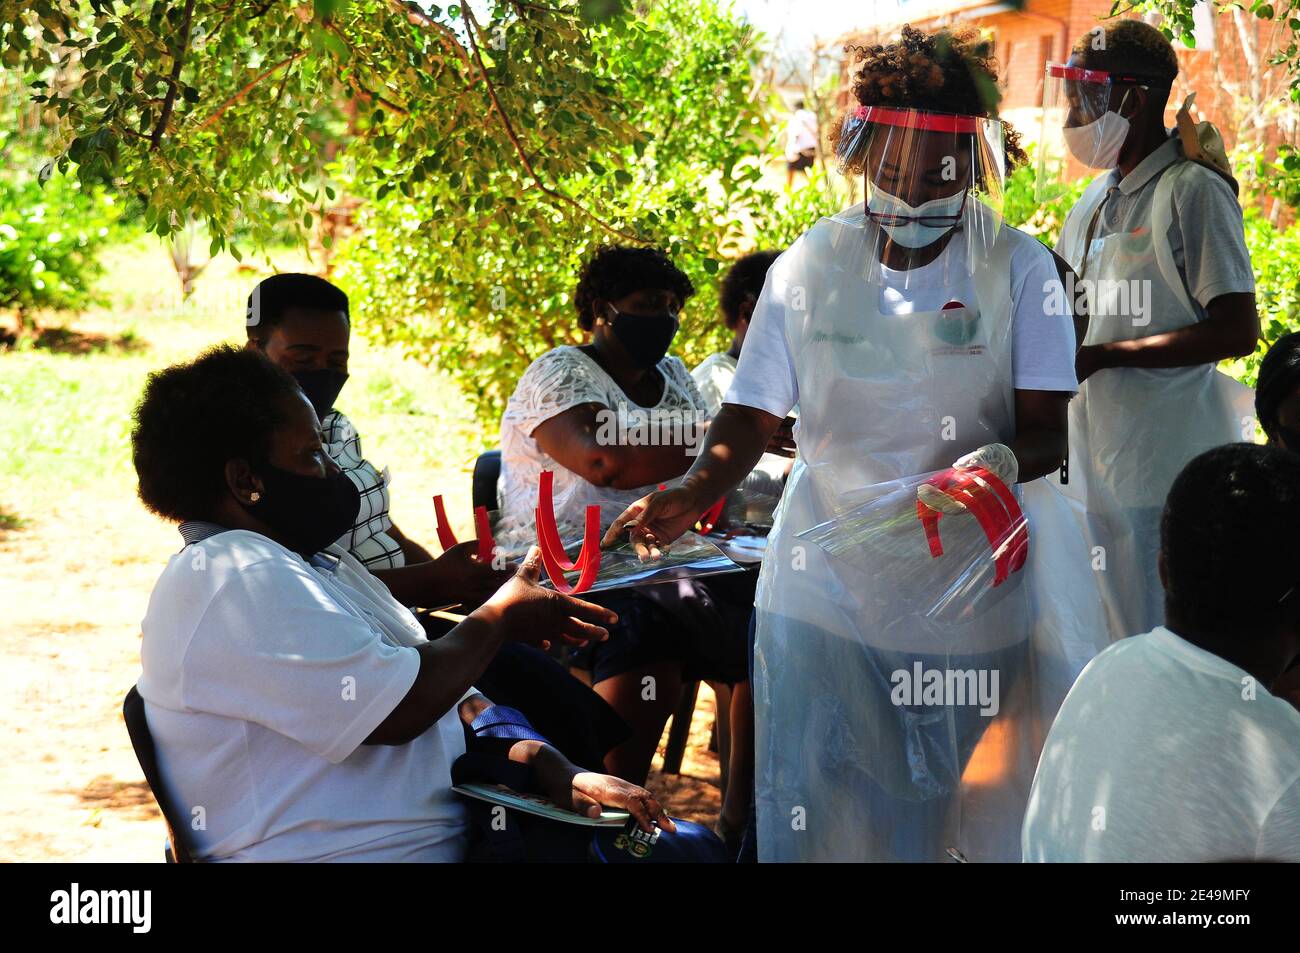 Community health care workers gather under a tree in Sekhukhune, a rural part of South Africa Stock Photo